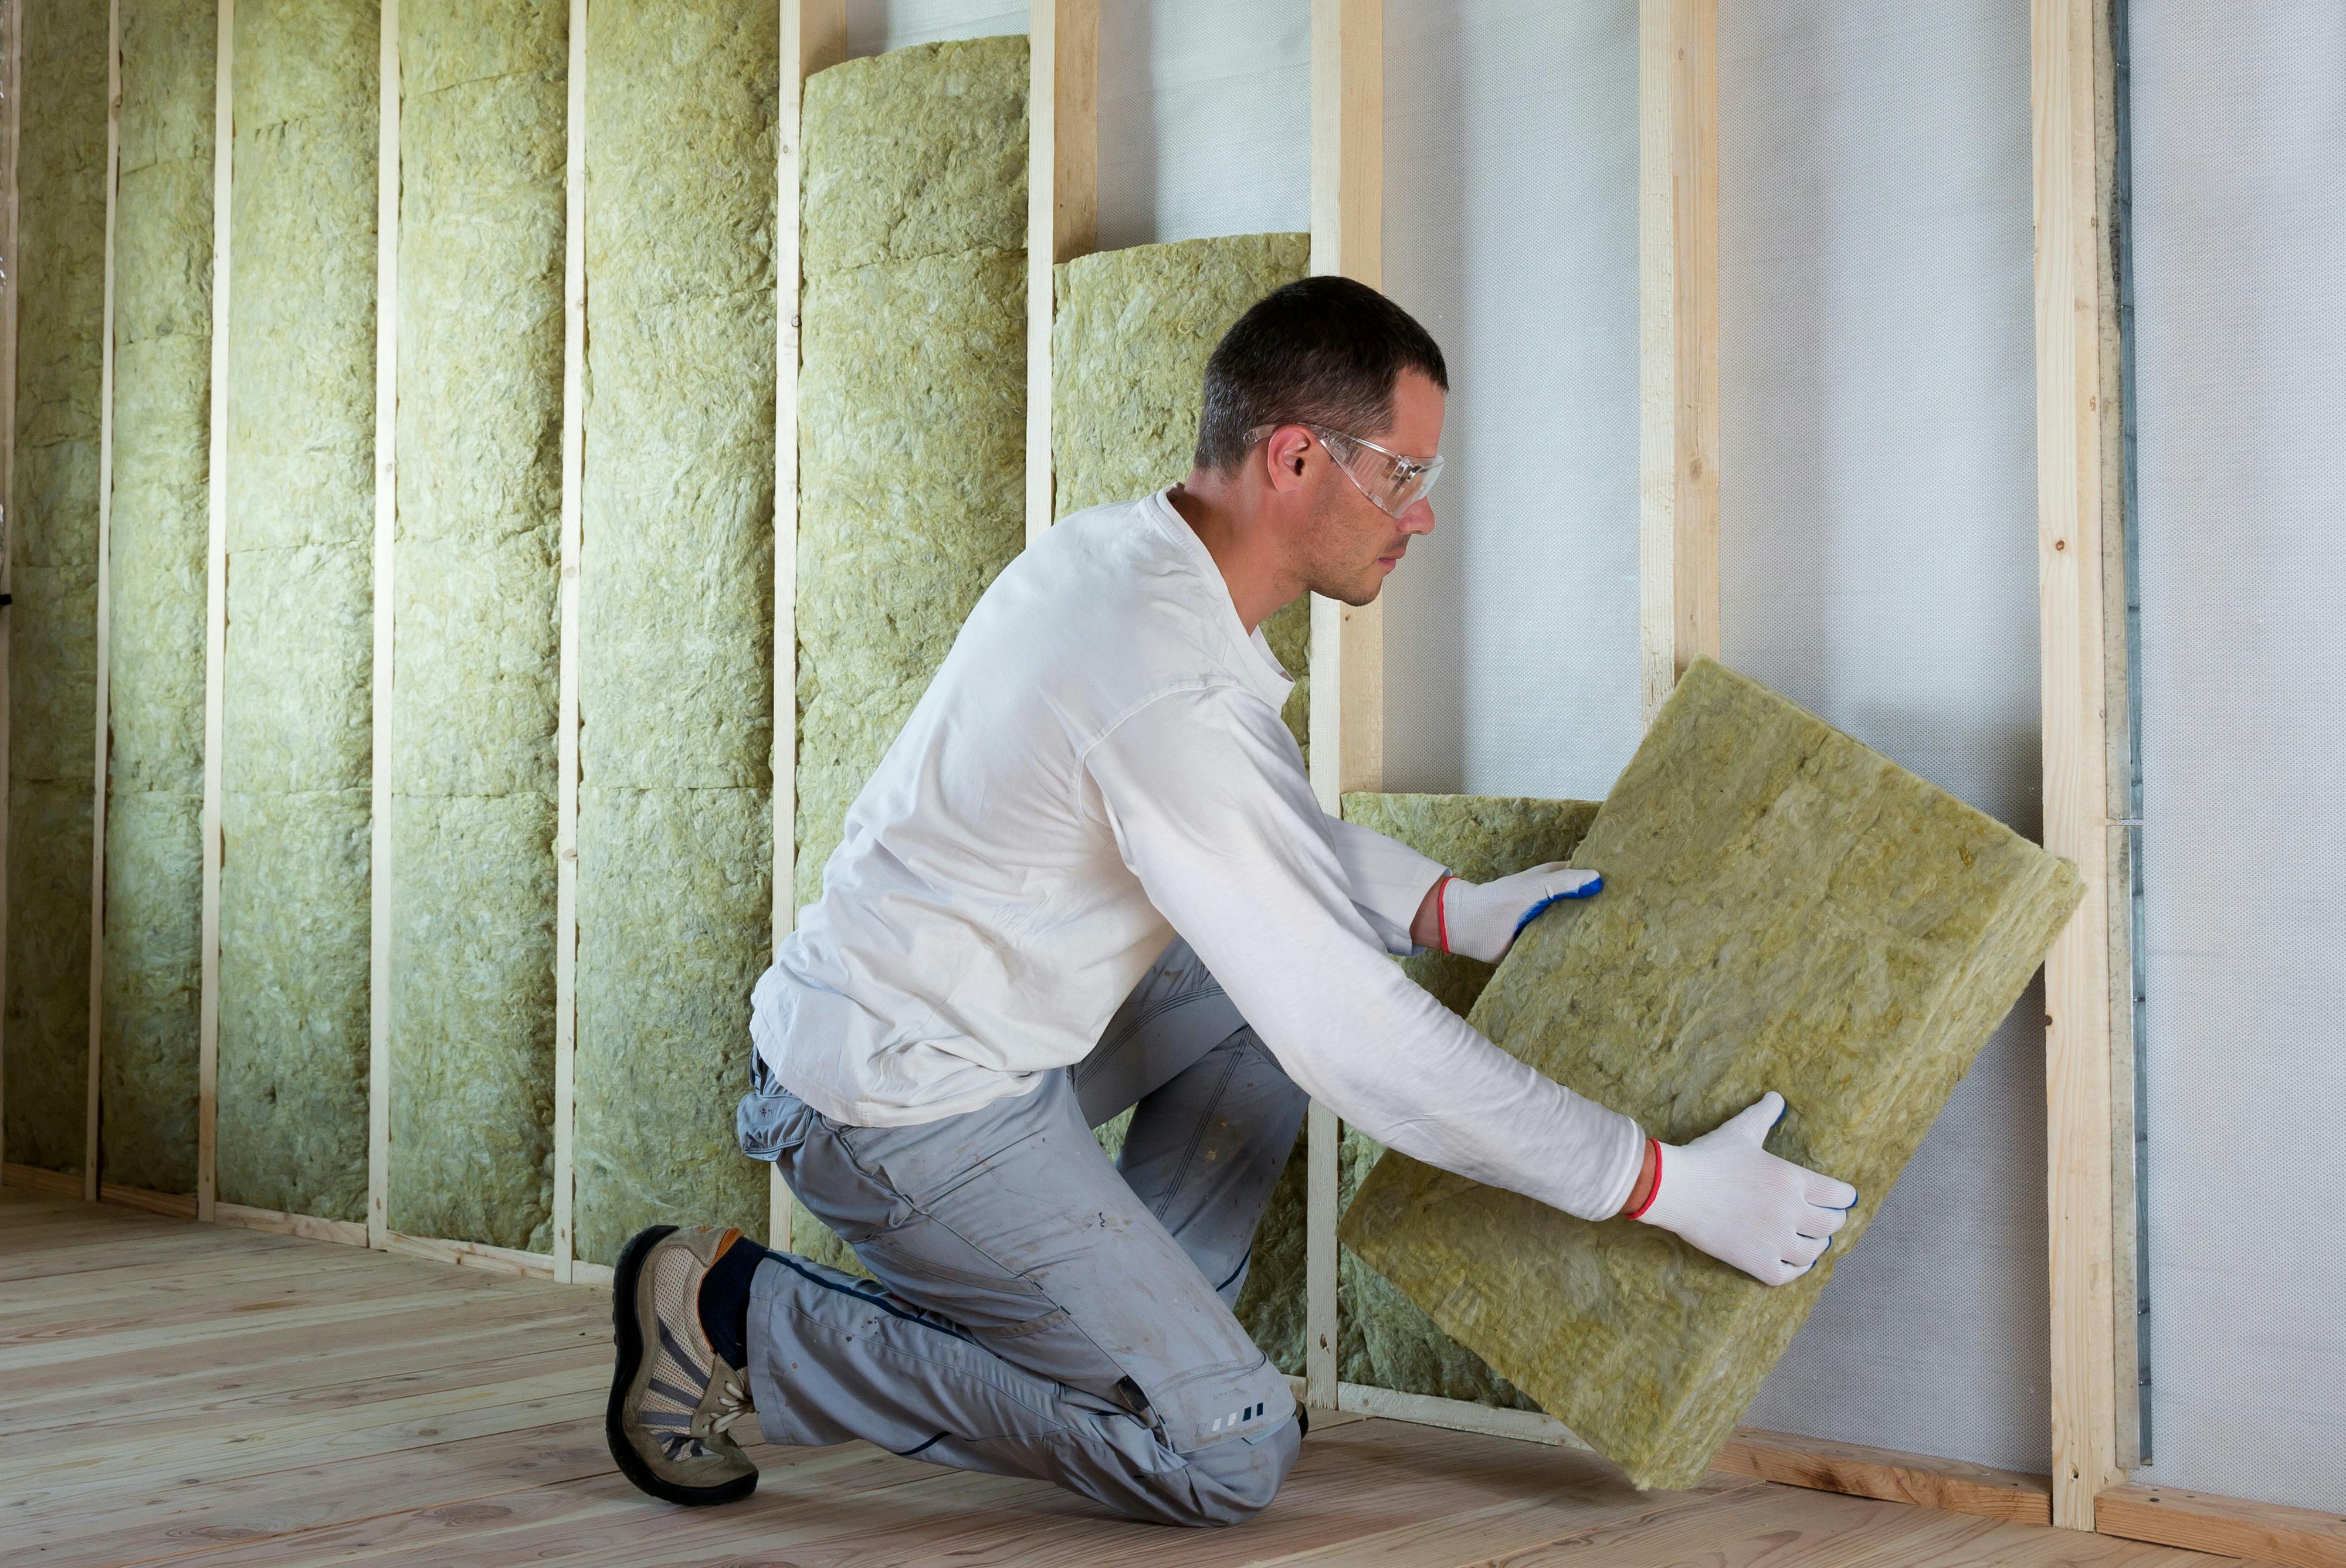 Internal Wall Insulation Rockwool Uk, Garage Partition Wall Cost Philippines